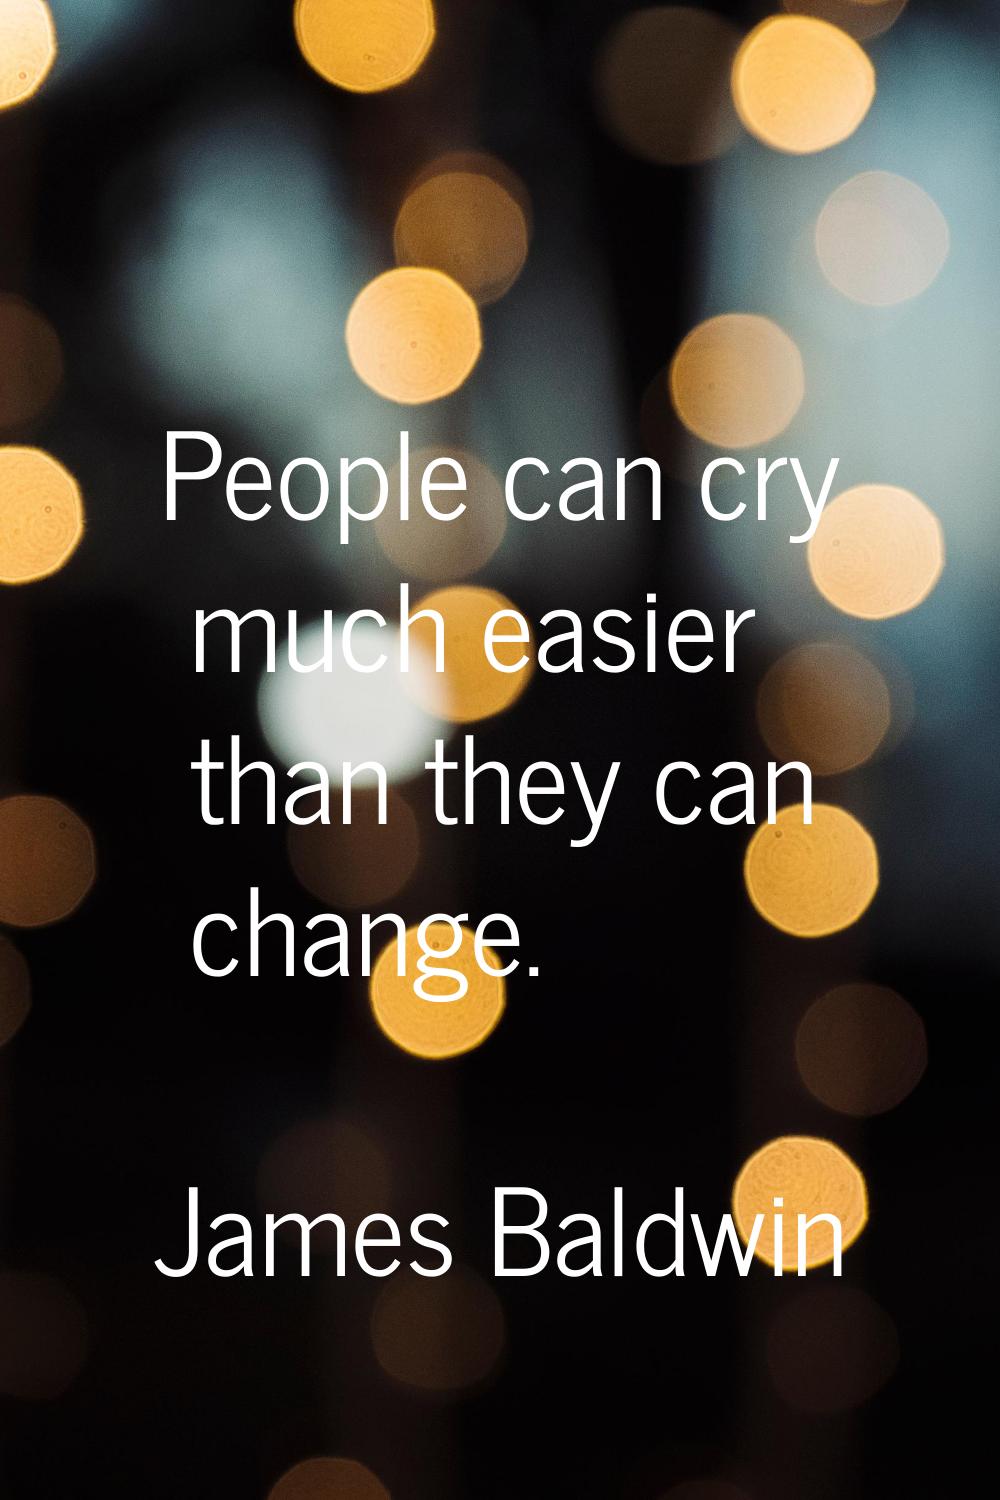 People can cry much easier than they can change.